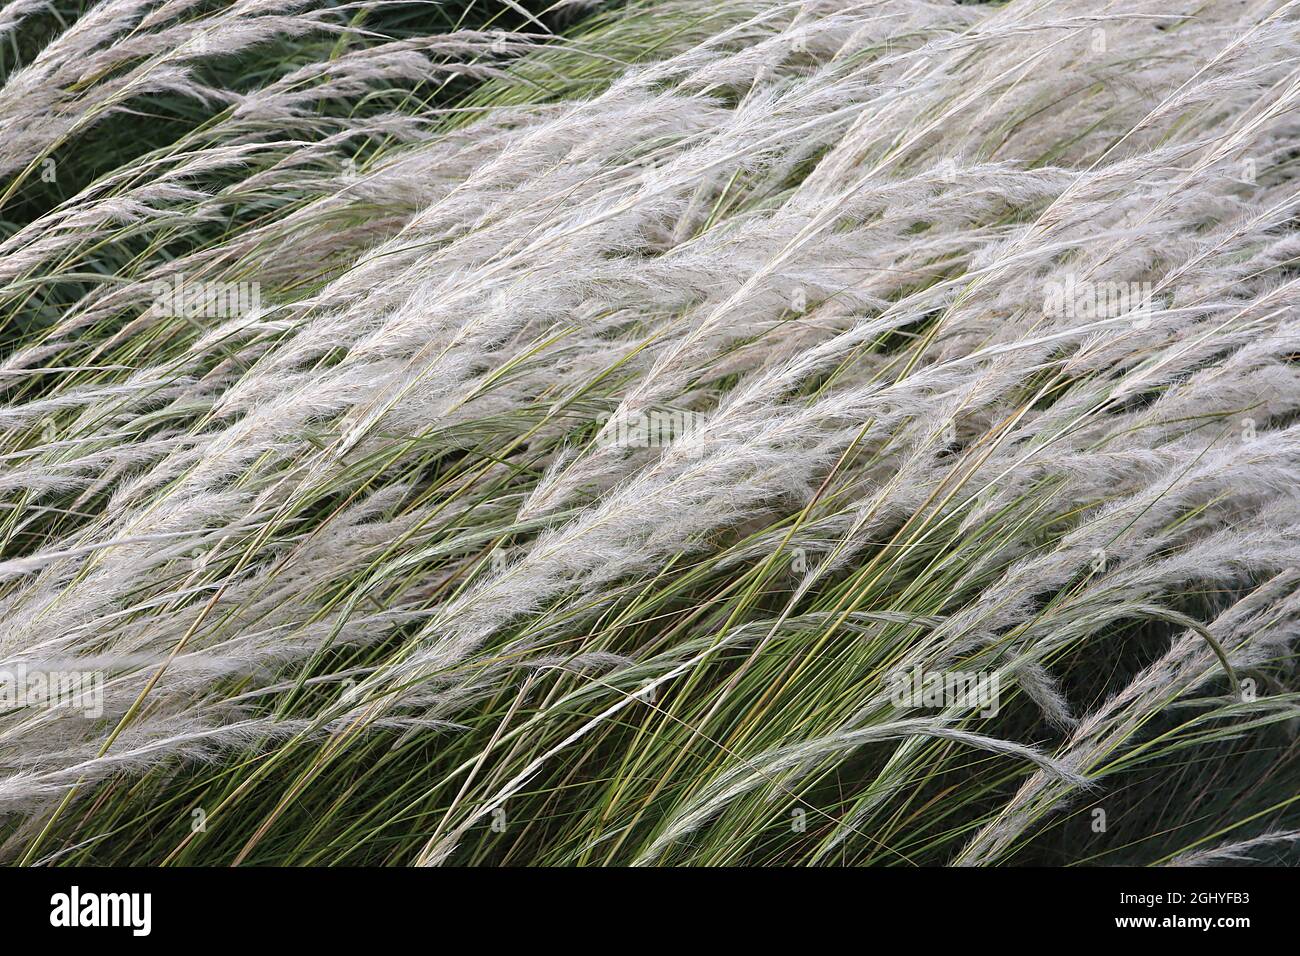 Stipa ichu Peruvian feather grass – long feathery arching plumes of silver white flowers and narrow mid green leaves,  August, England, UK Stock Photo